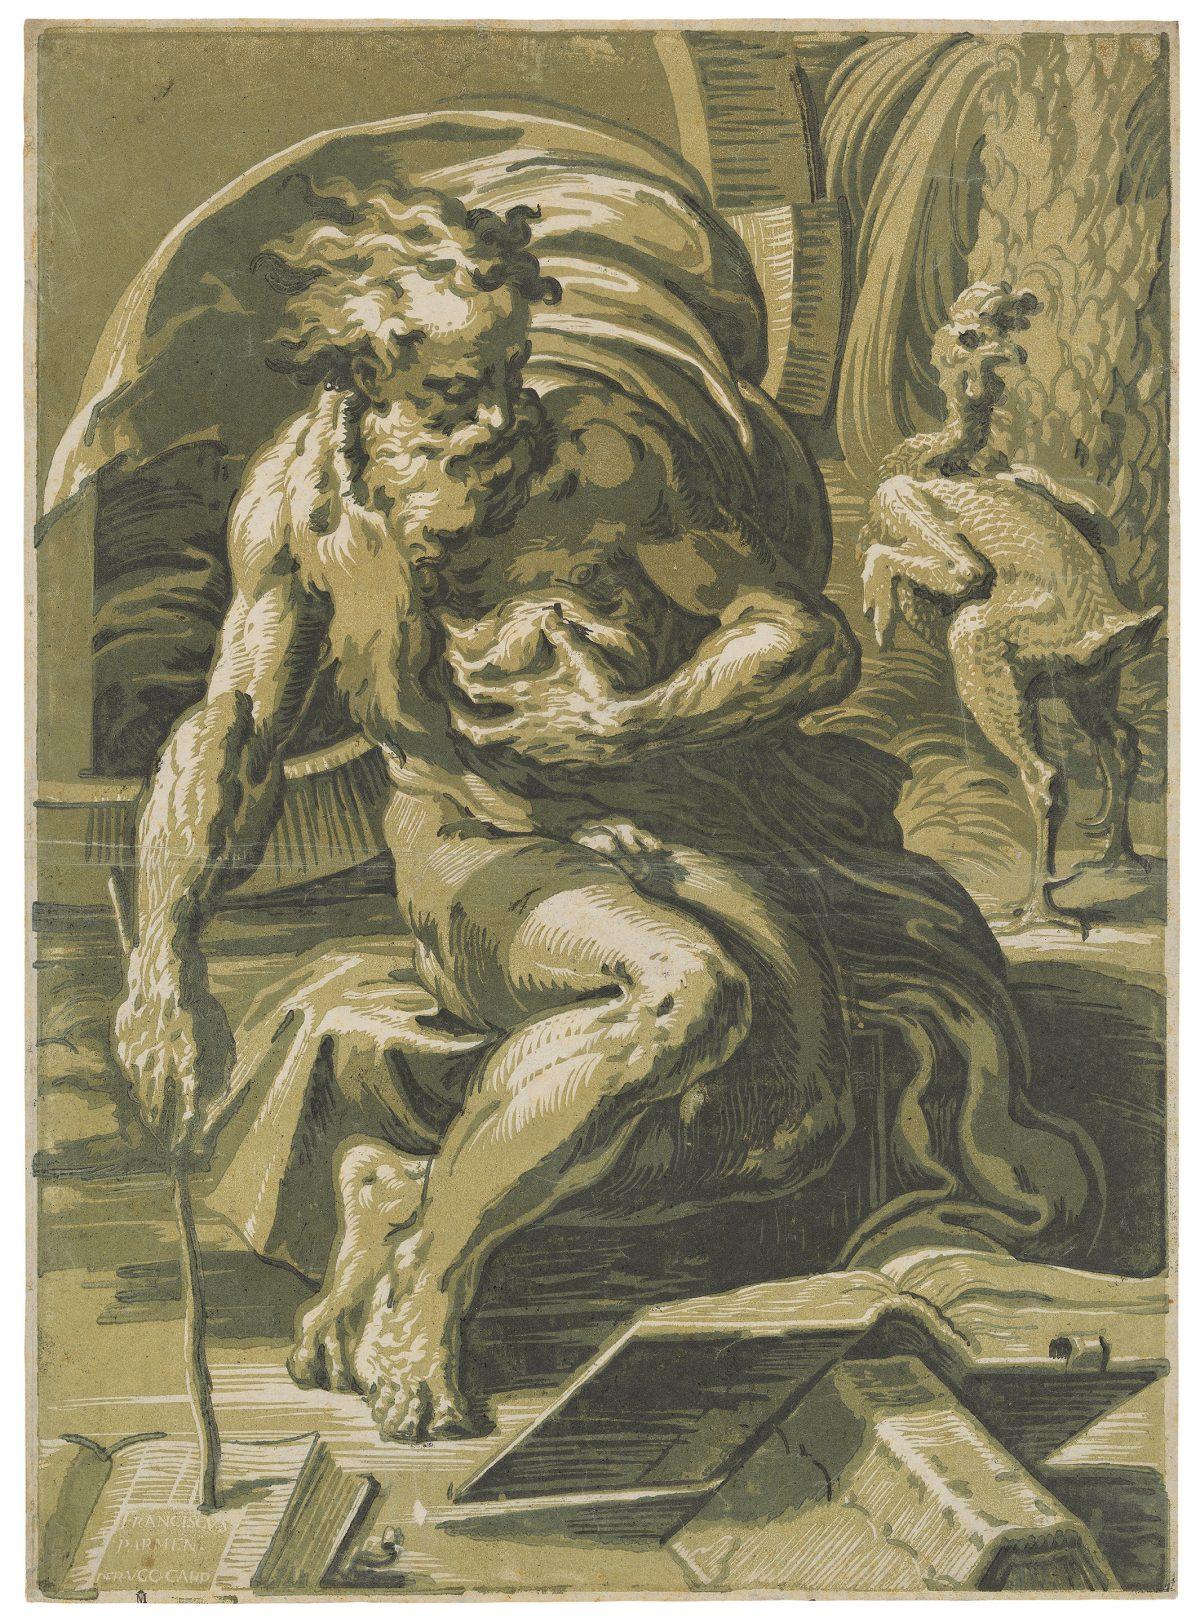 “Diogenes,” circa 1527–1530, by Ugo da Carpi, after Parmigianino. Chiaroscuro woodcut from four blocks in light blue, green-blue, green, and gray, state i/iii, 18 3/4 inches by 13 3/4 inches. The University of Texas at Austin, purchase through the generosity of Julia and Stephen Wilkinson. (Blanton Museum of Art, The University of Texas)